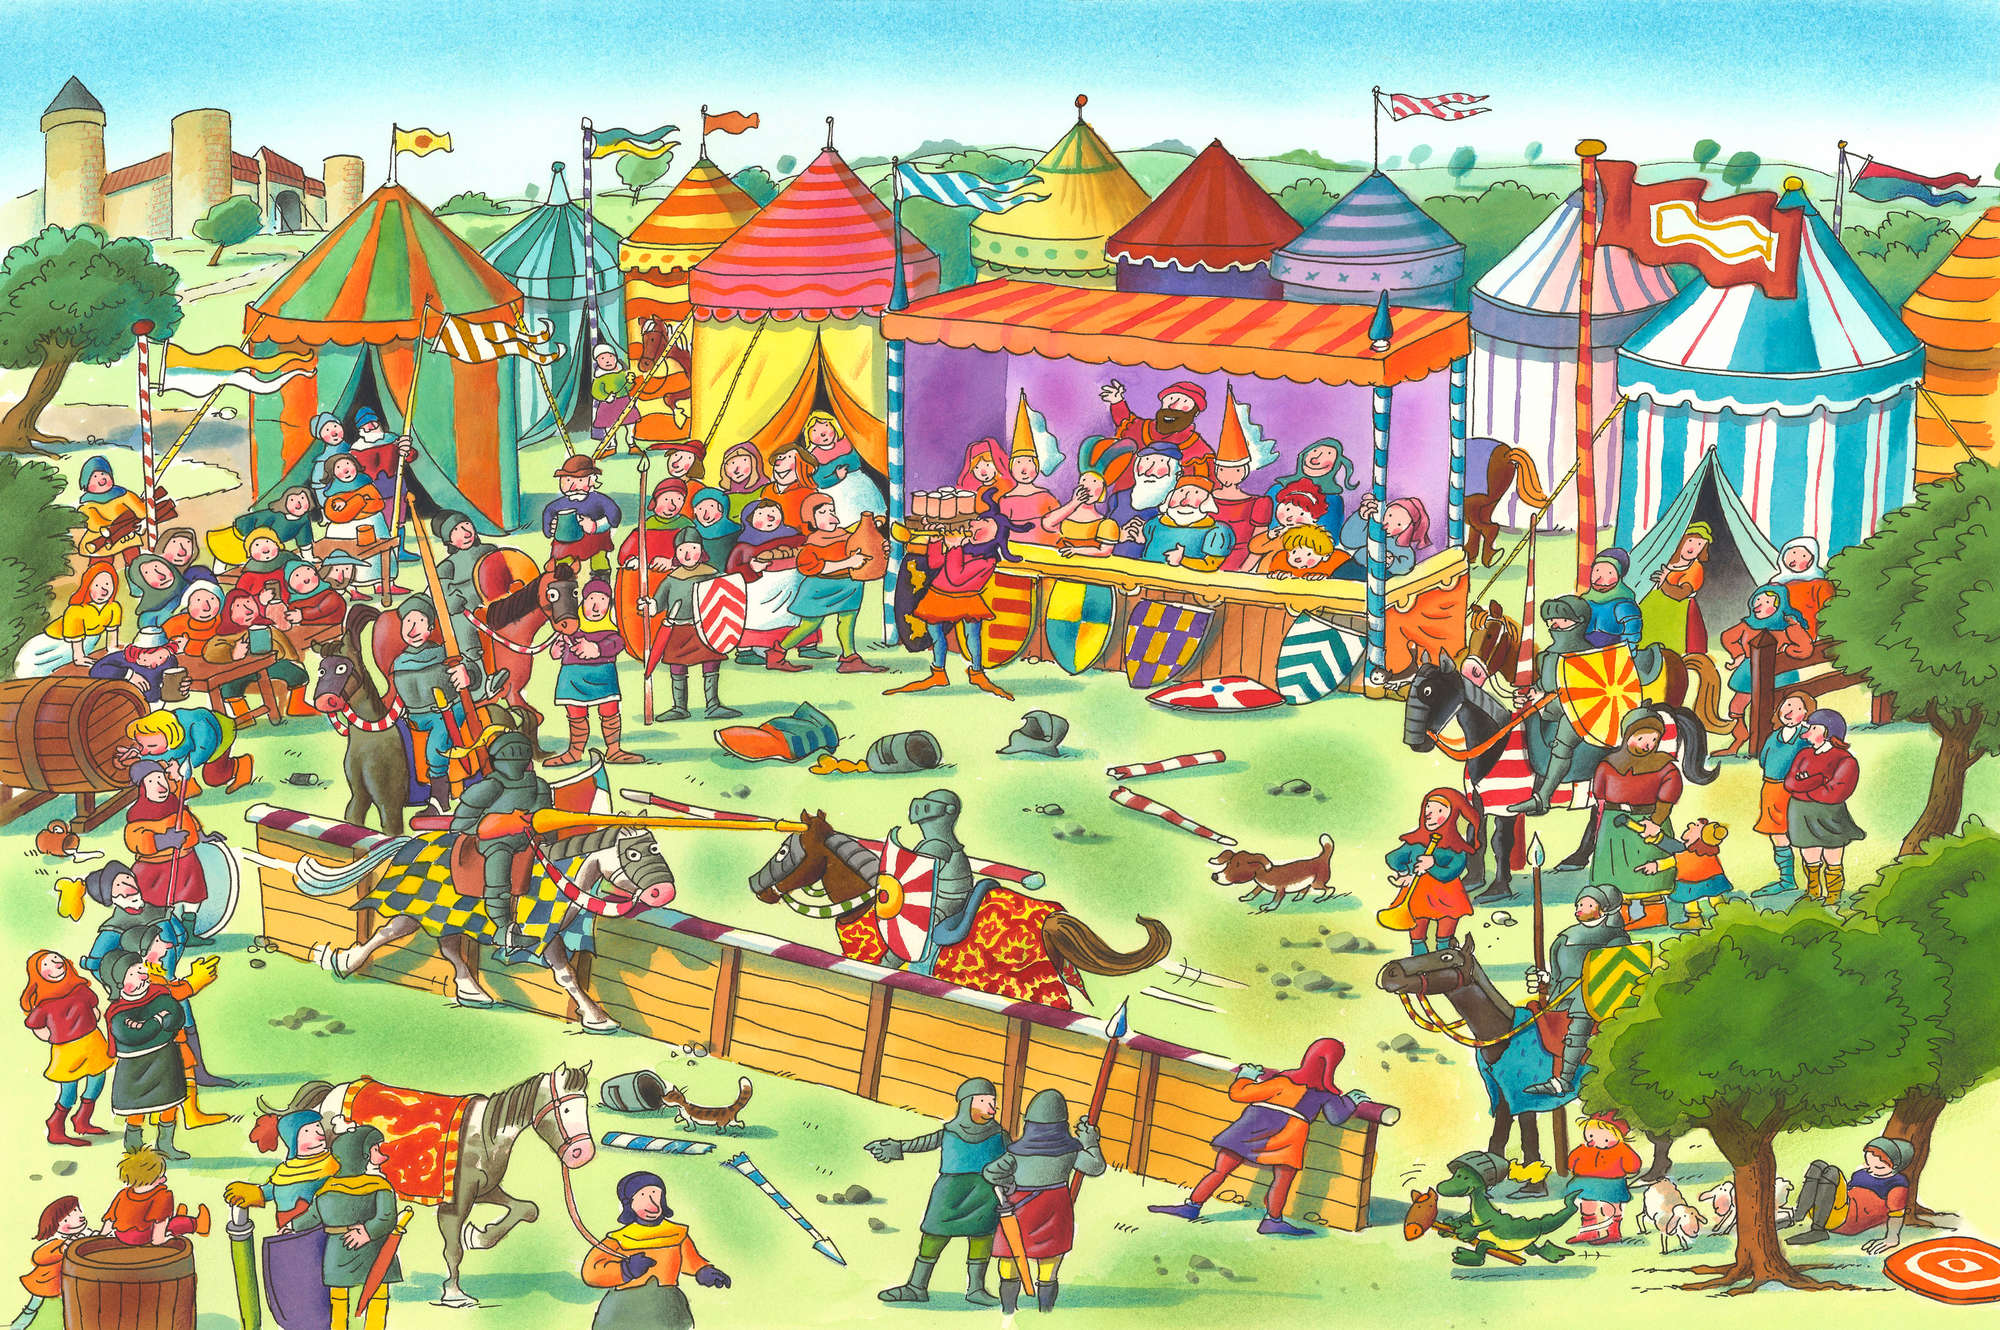             Children mural knight festival with festivals blue and yellow on matt smooth non-woven
        